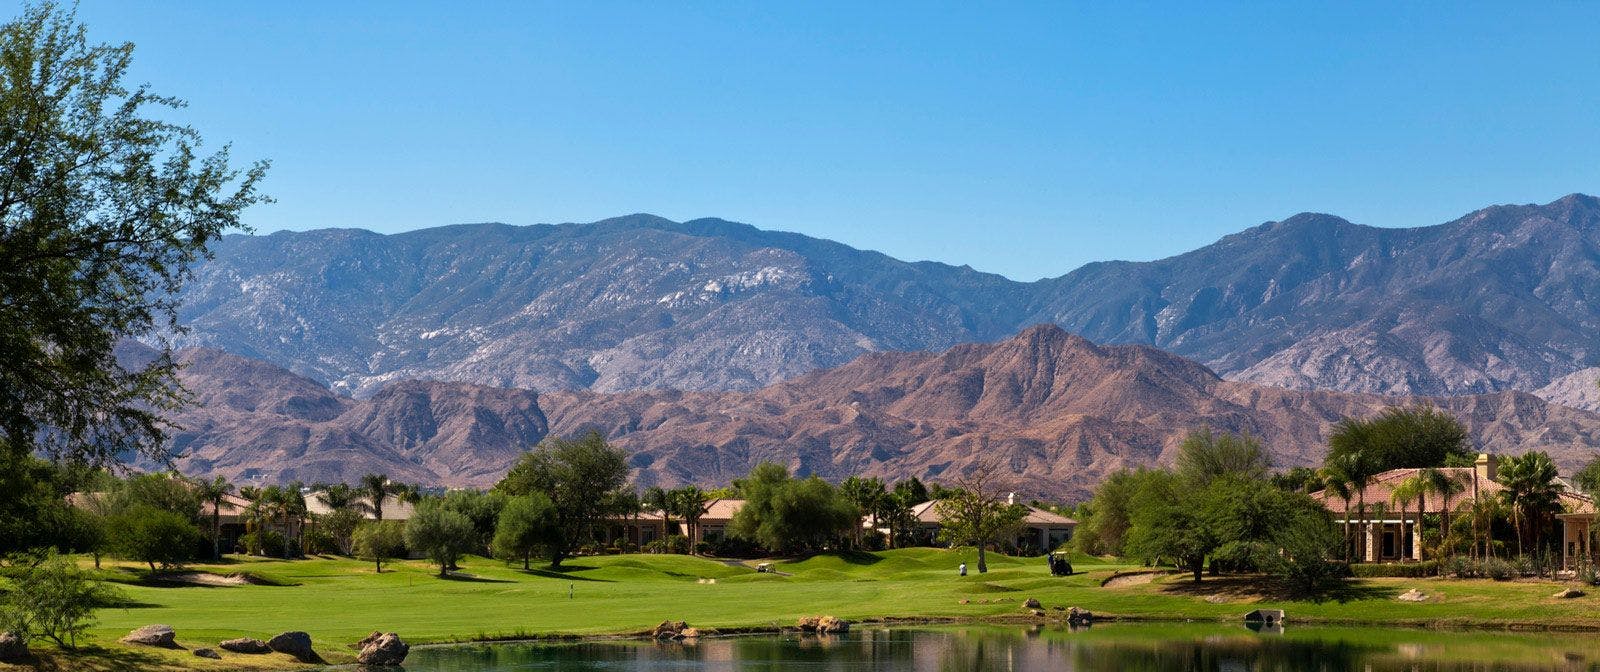 Rancho Mirage golf course and mountains